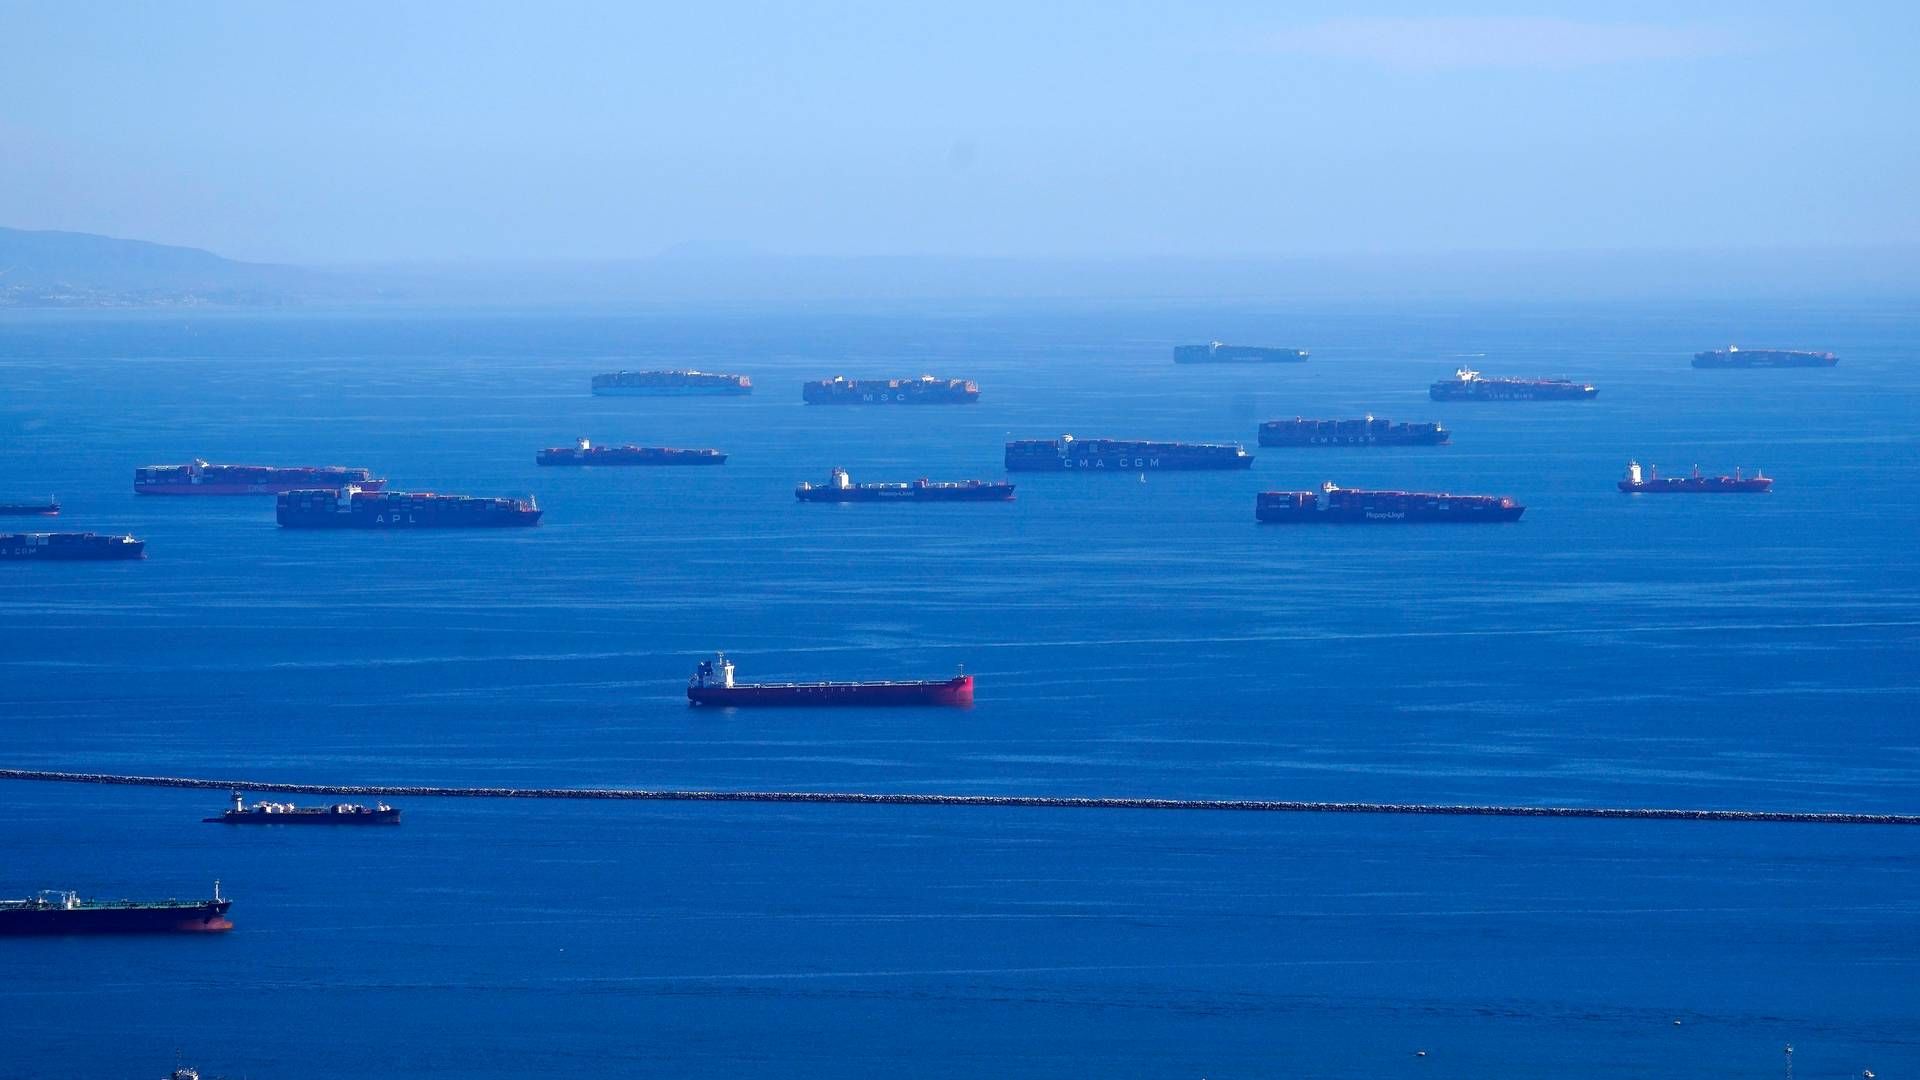 Cargo ships in the waters off the West Coast of the United States where the Star Maia has been fined for discharging dirty sewage. | Photo: Mark J. Terrill/AP/Ritzau Scanpix